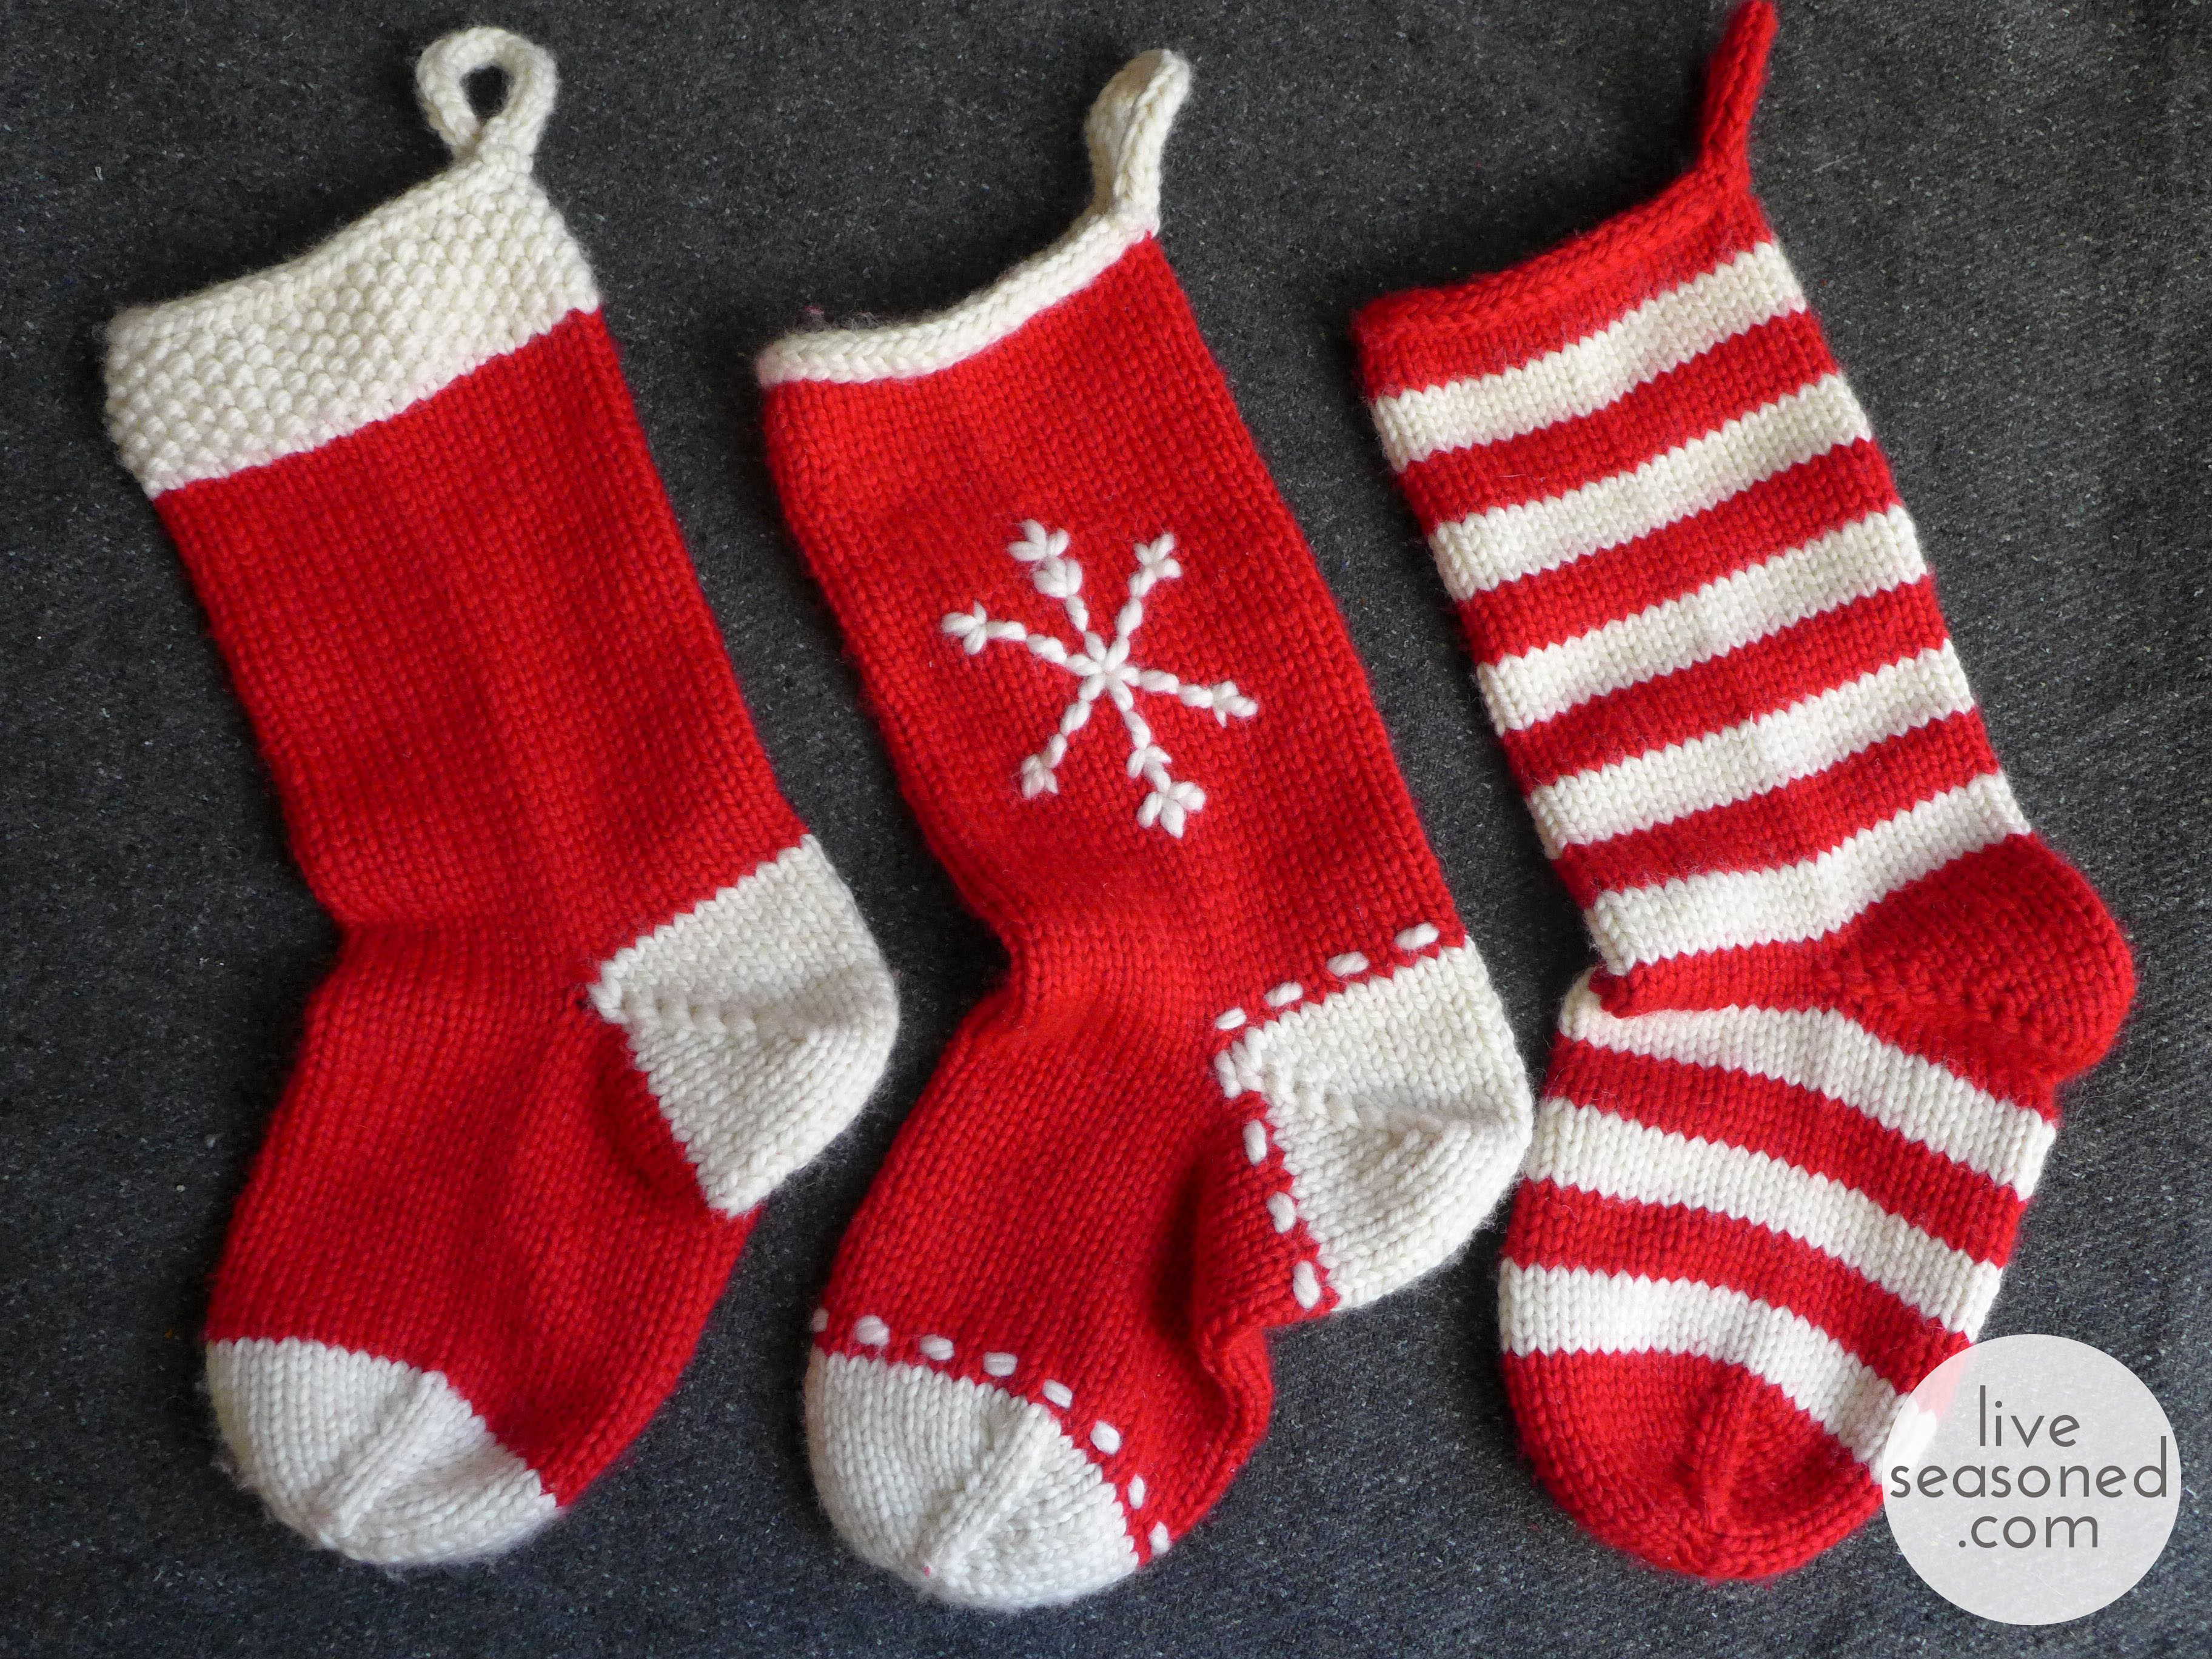 Christmas Stocking Knitting Patterns Weekend Project Knit A Stocking Or Three